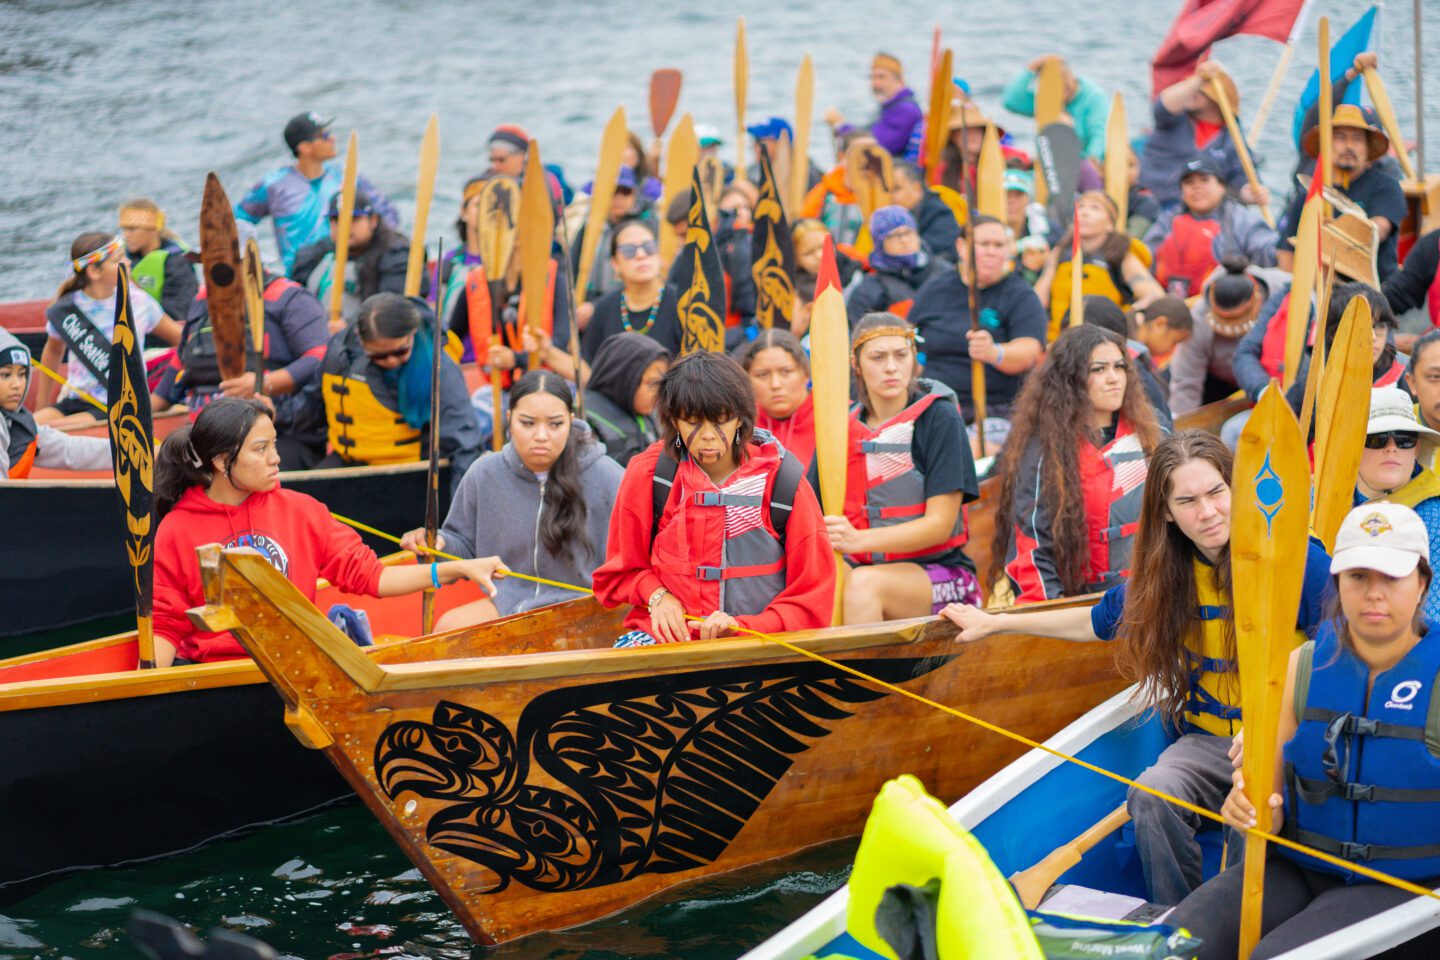 Members of various Tribal Nations float on the Sound in their canoes.